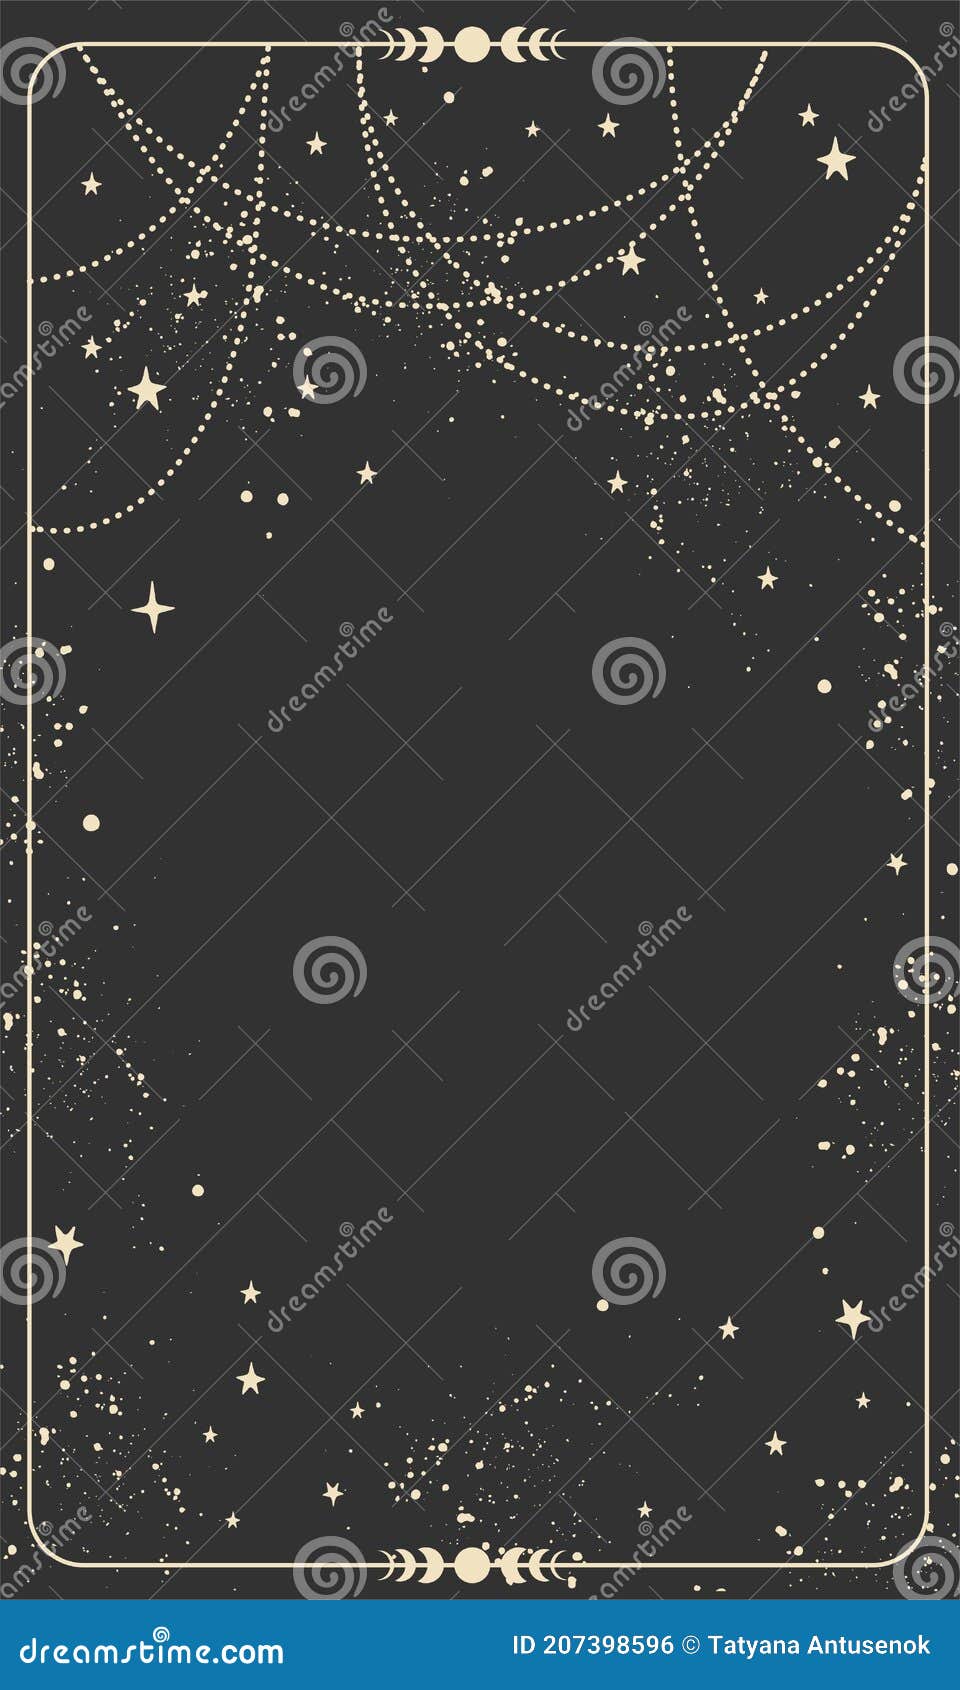 vintage celestial mystical background for astrology, divination, tarot. black postcard with a frame in a bohemian 